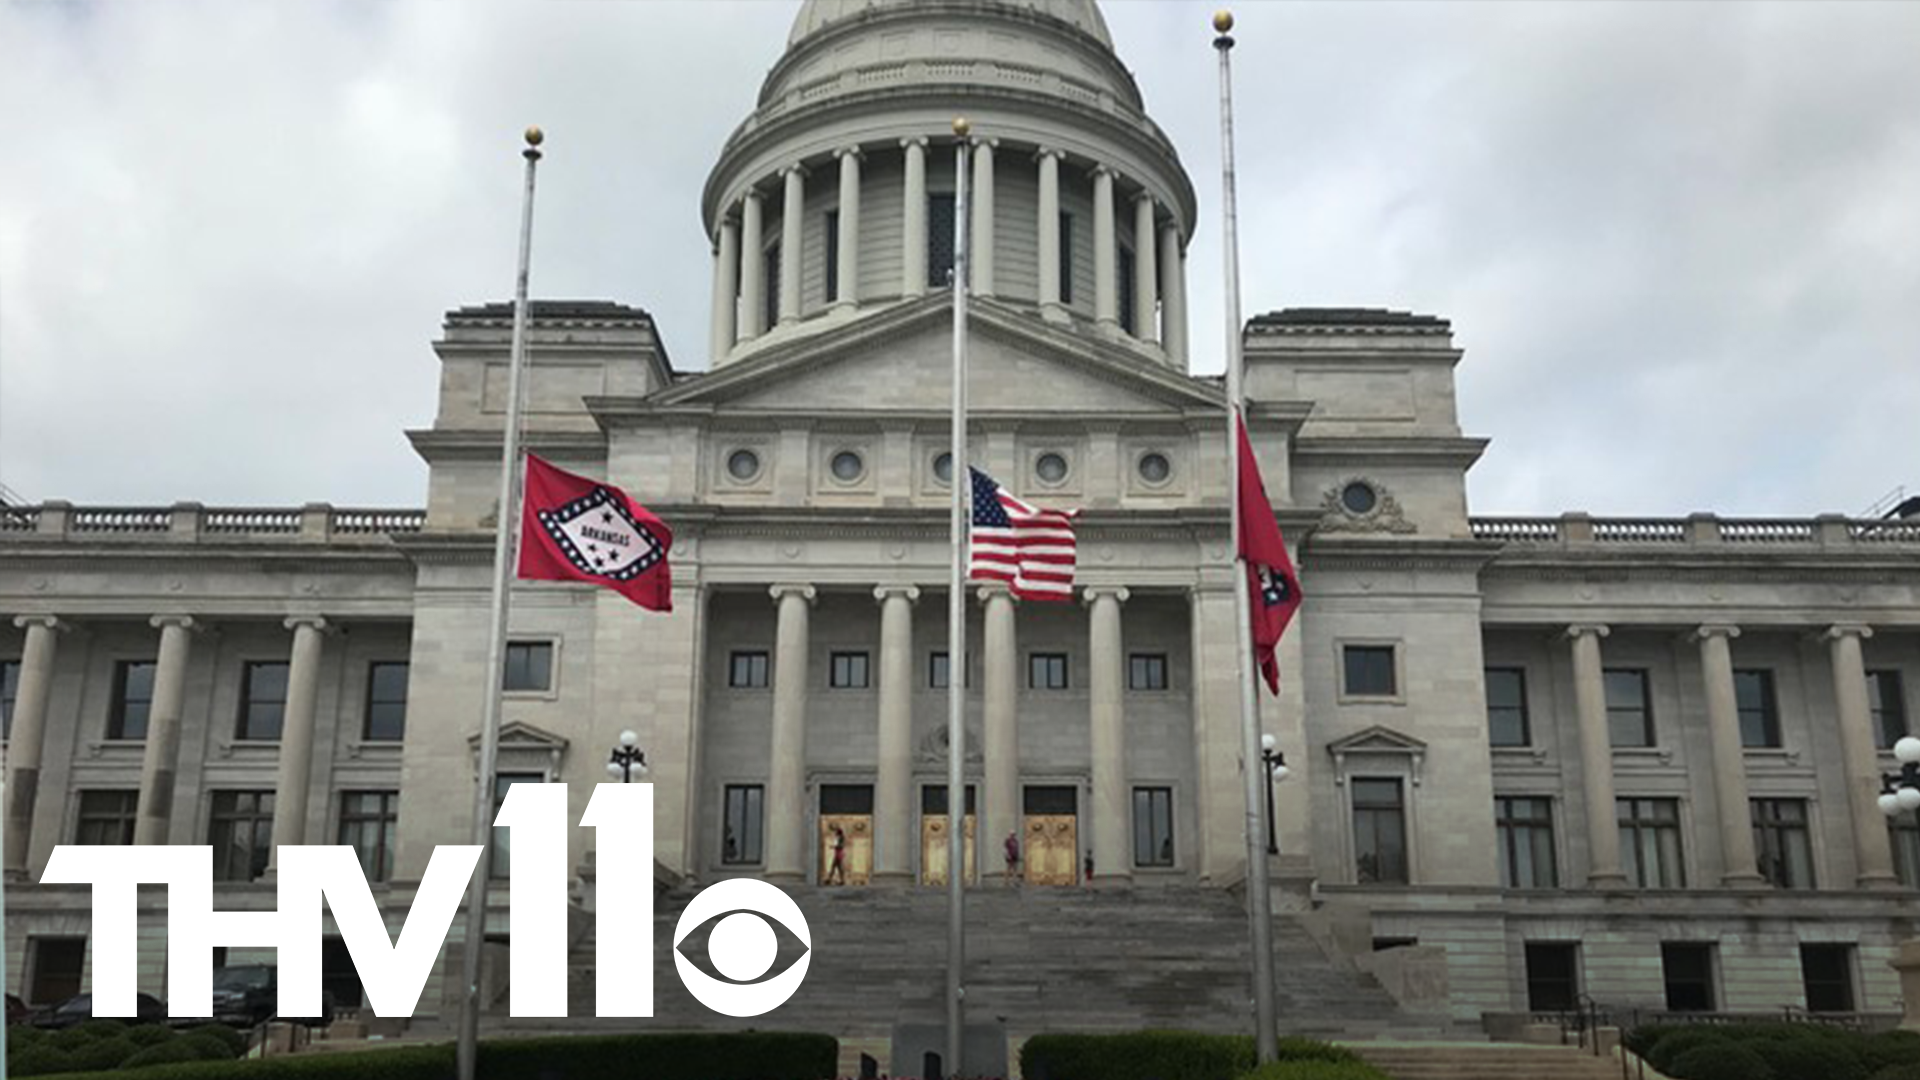 A scaled-back, more vague version of a previous hate crime bill passed through the Arkansas Senate after a week of contention within the state legislature.